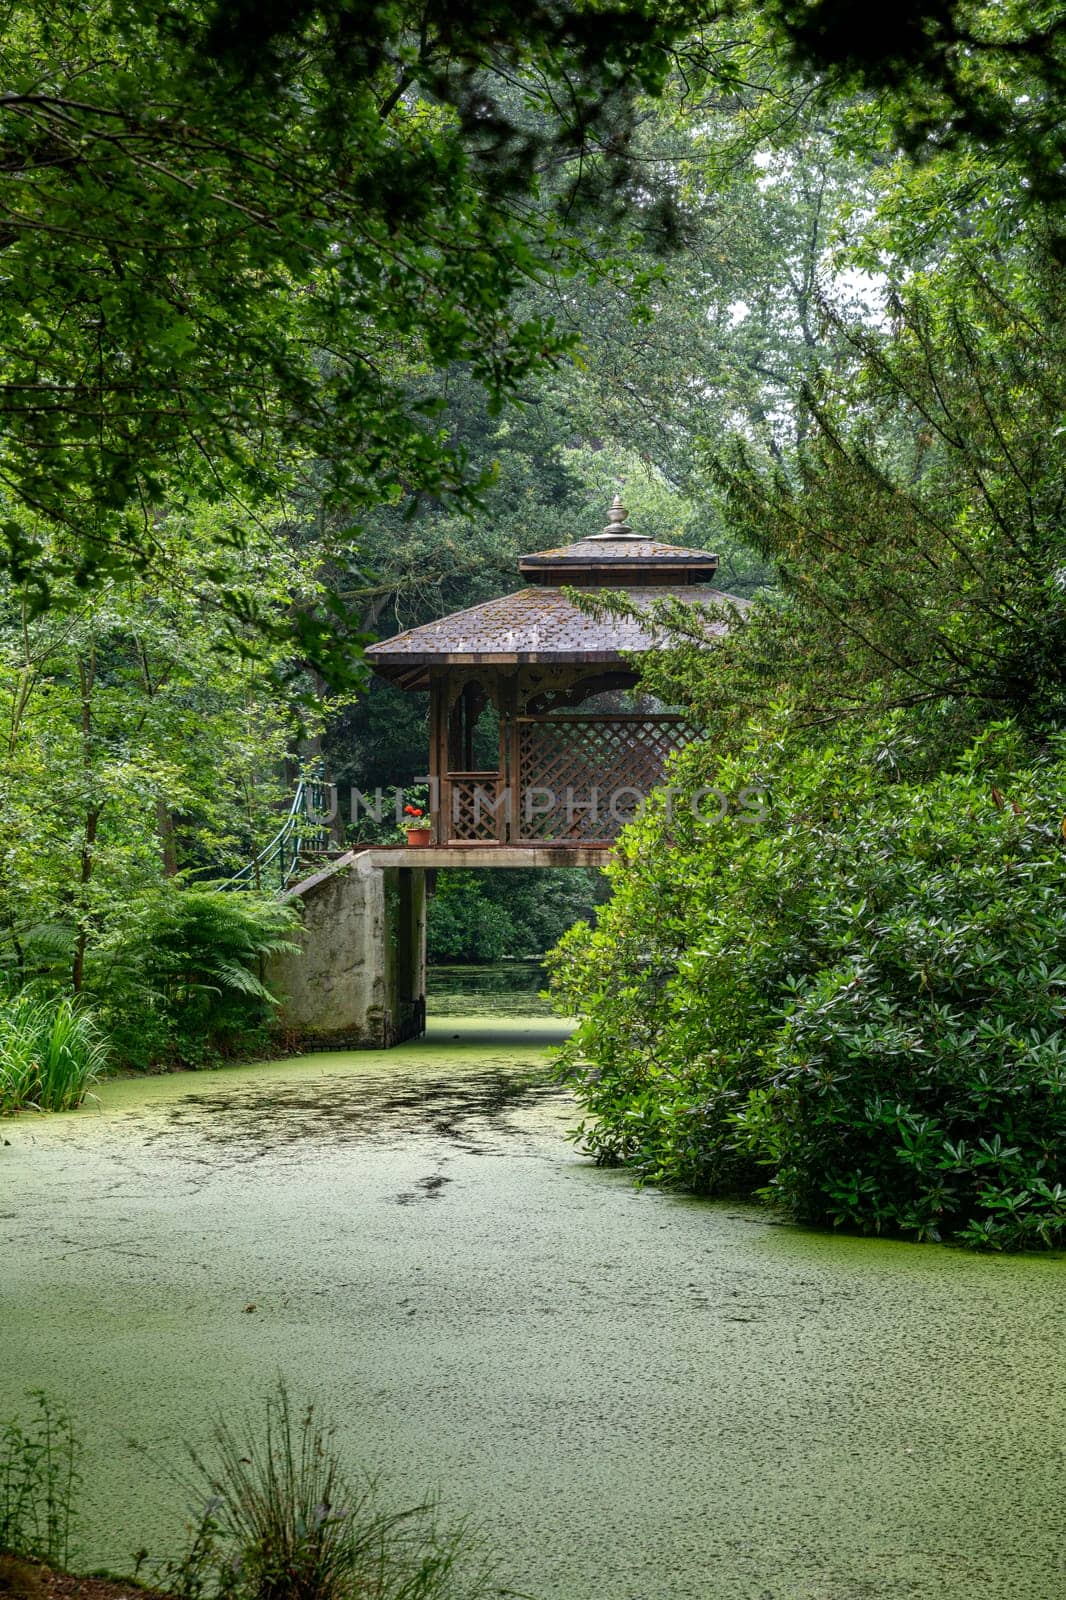 beautiful wooden pagoda in a park with ponds and gardens with green trees and potter flowers here and there